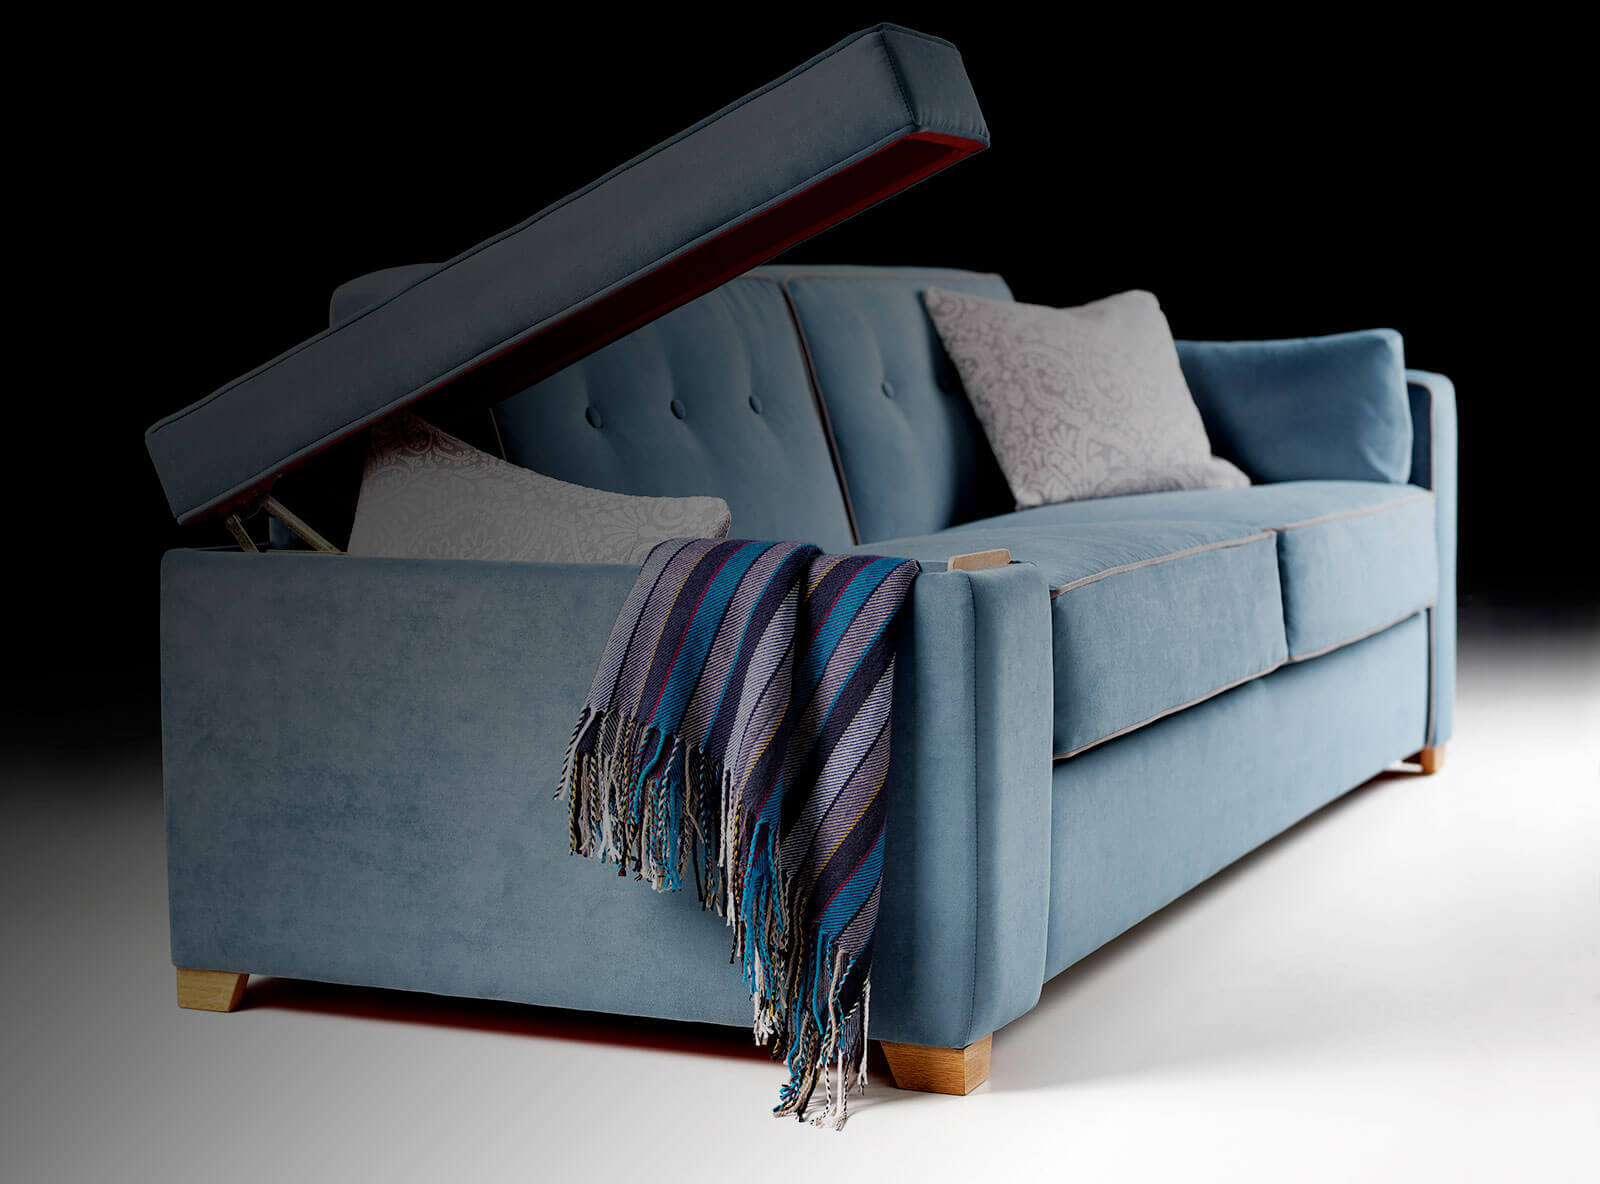 Sofa Beds With Storage Arms, Can You Use A Sofa Bed Everyday